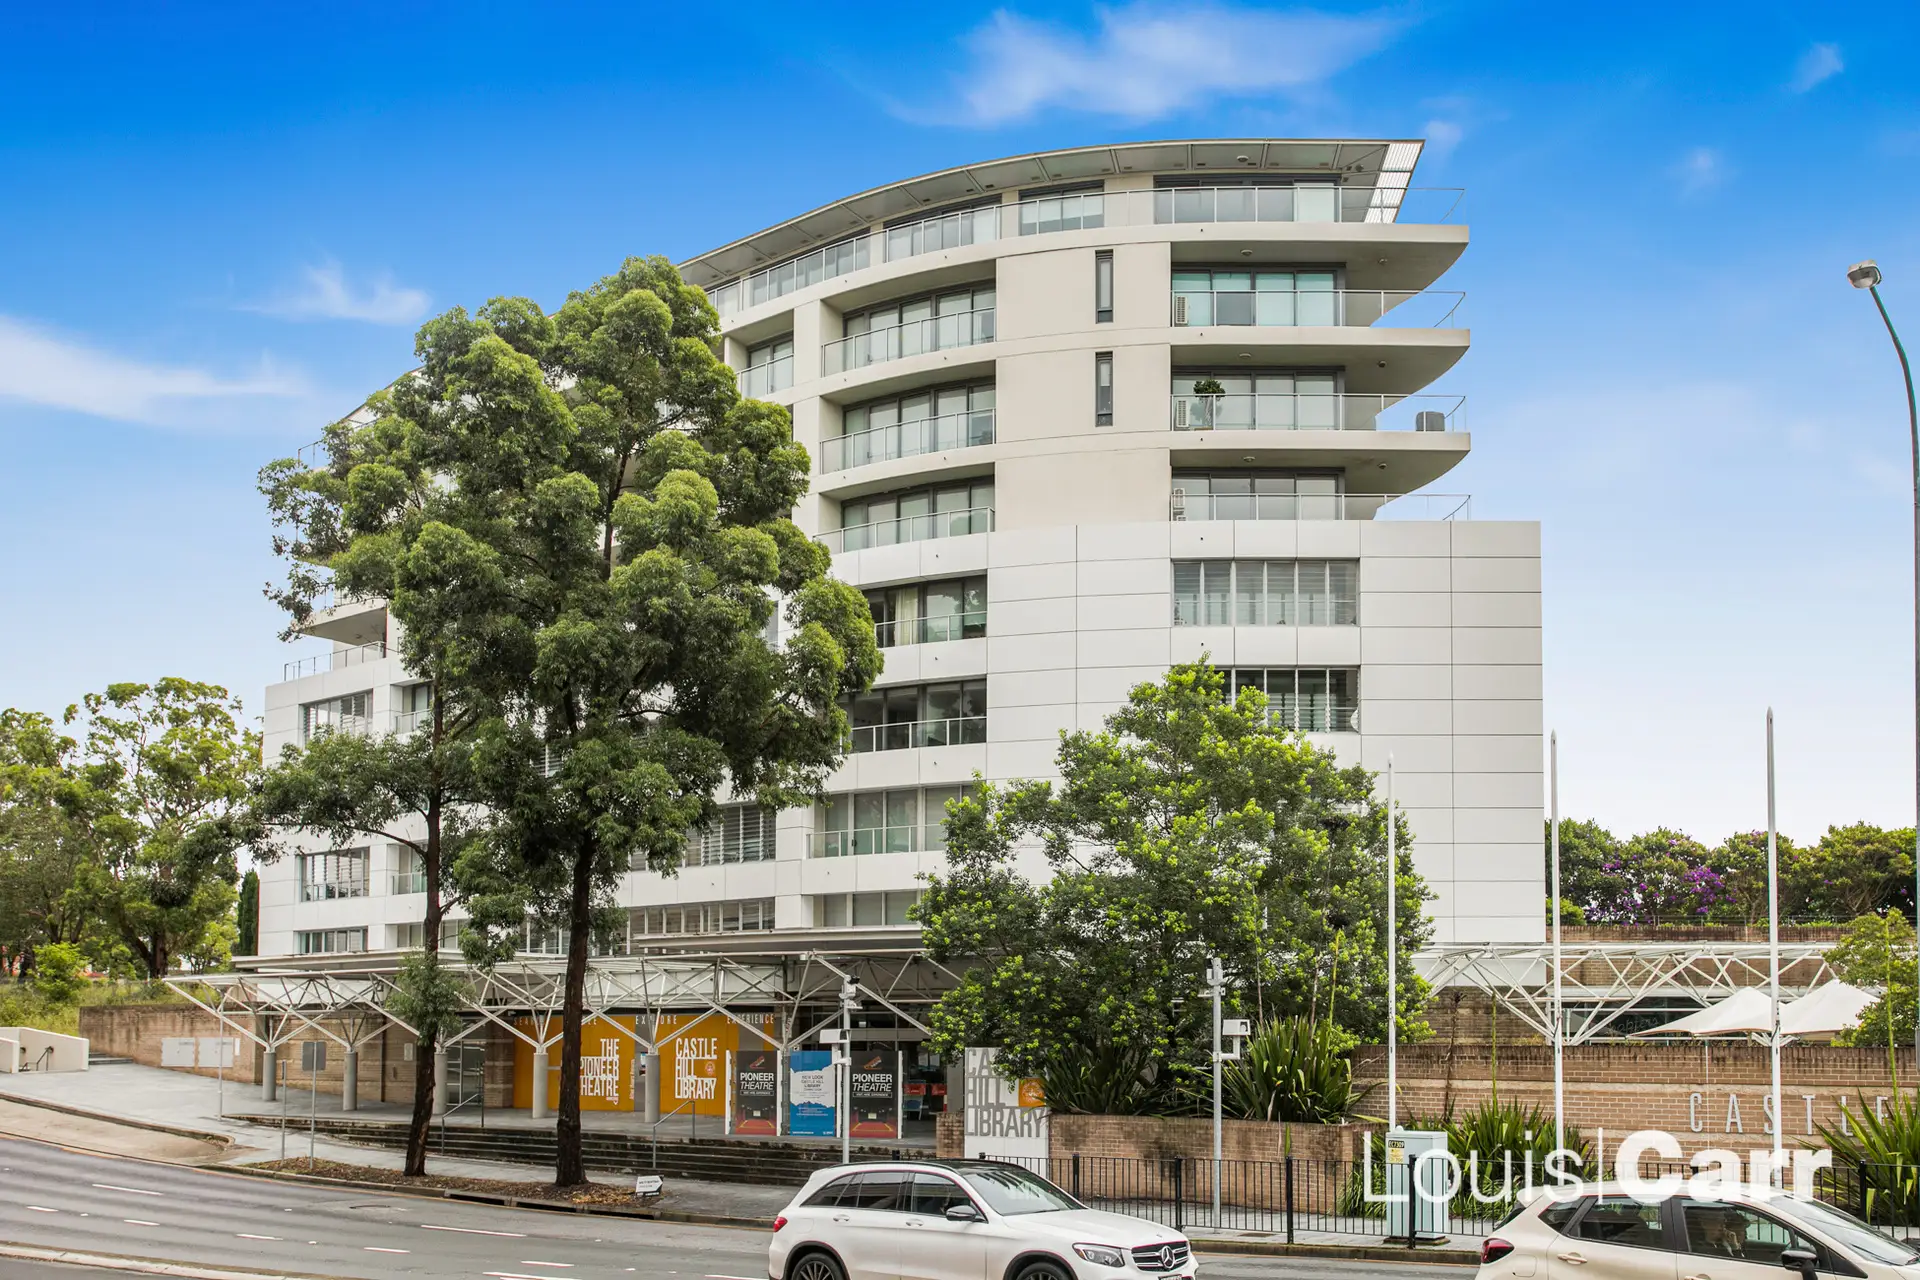 Photo #1: 707/12 Pennant Street, Castle Hill - Sold by Louis Carr Real Estate